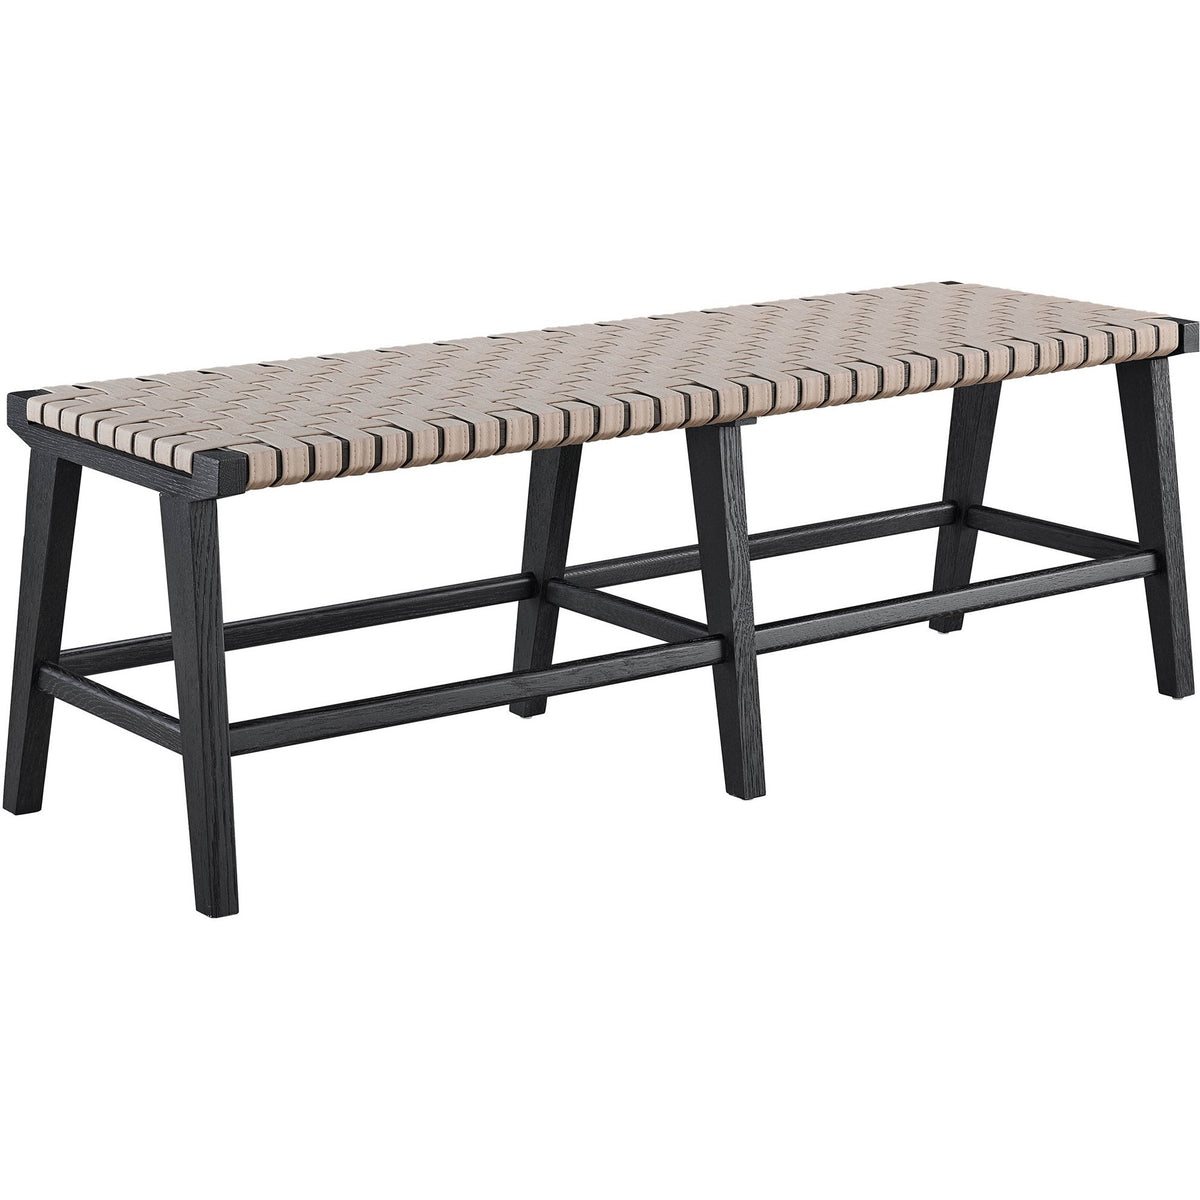 Harlyn Bench - Be Bold Furniture